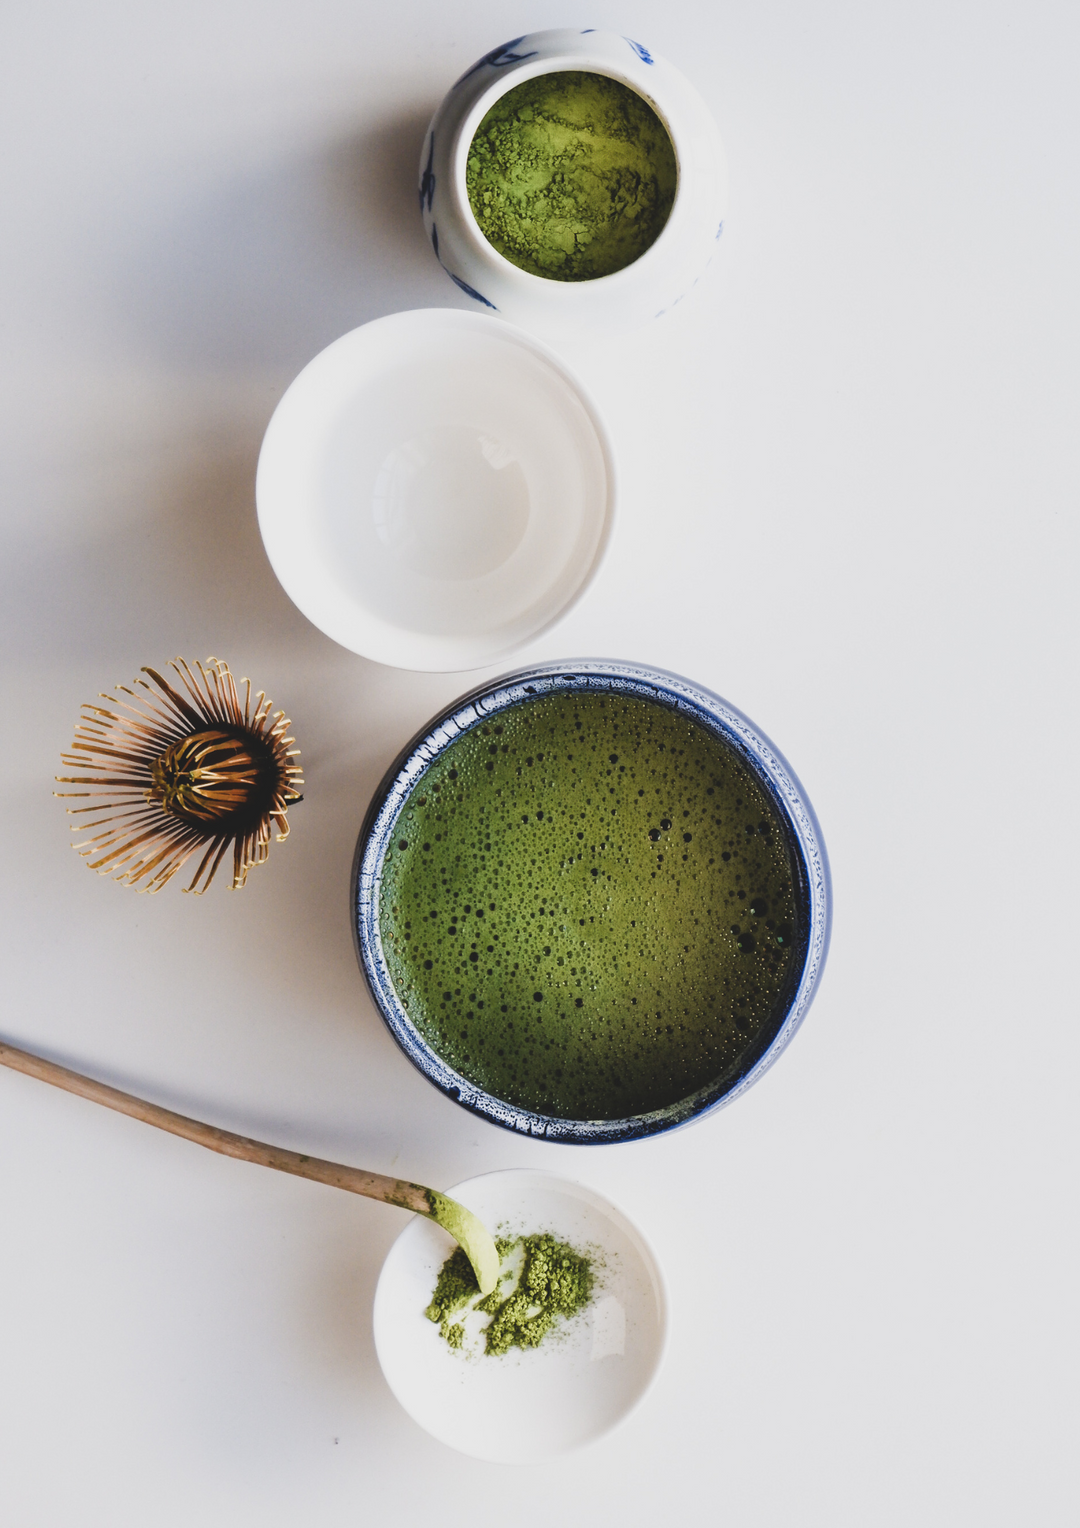 Traditional Japanese matcha green tea ceremony with a bamboo whisk and tea bowl.